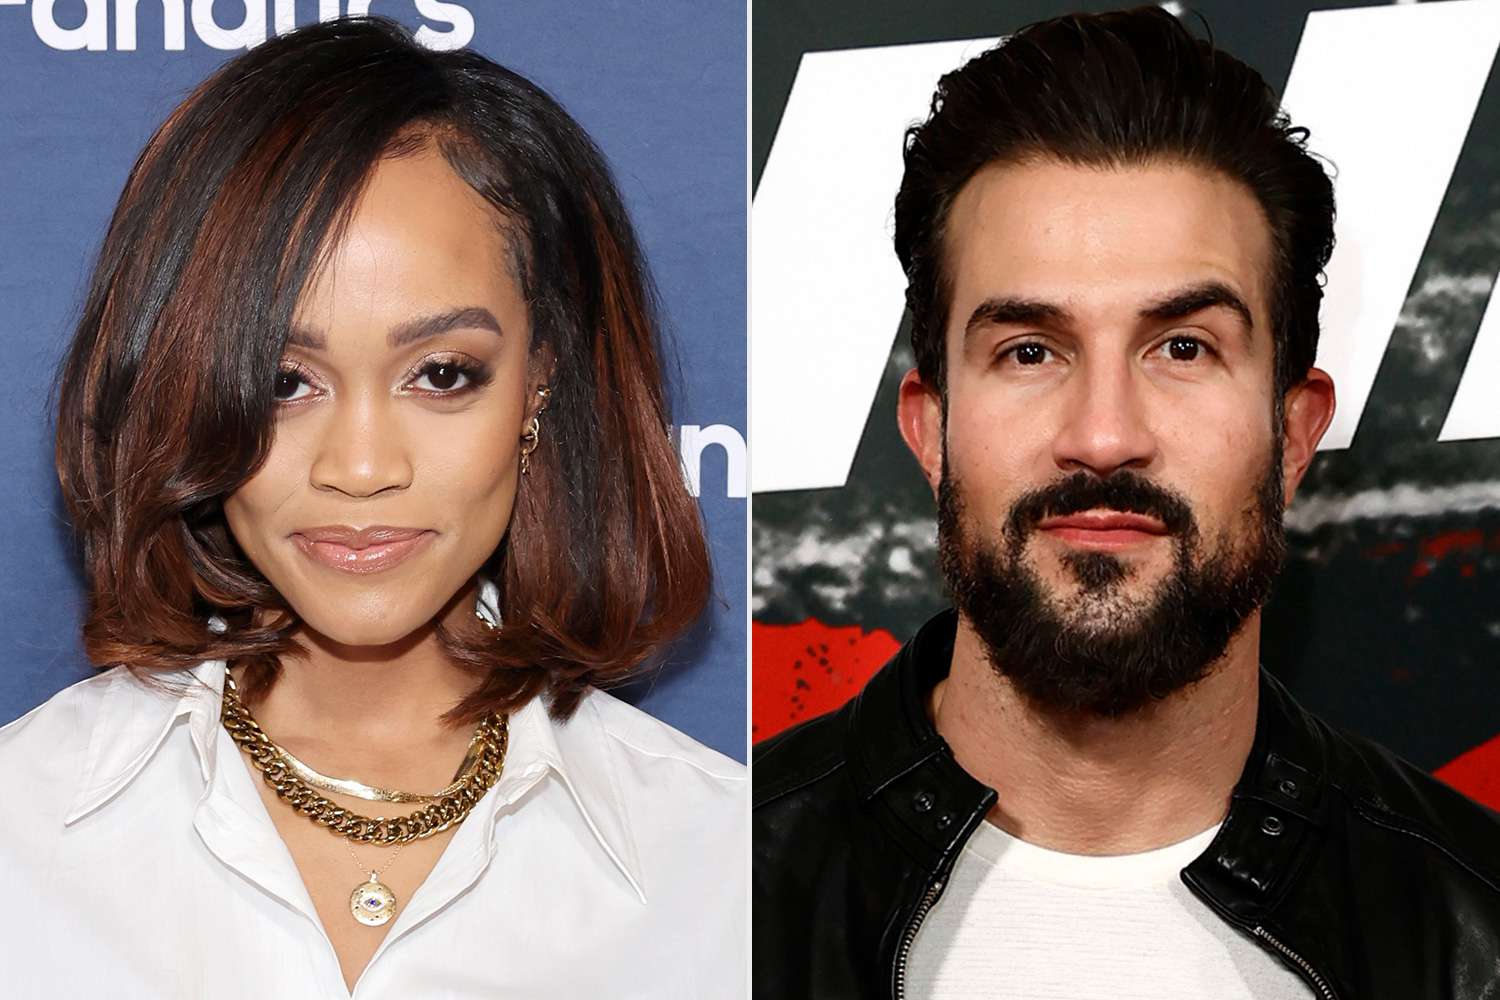 Bryan Abasolo Seeking Spousal Support from Rachel Lindsay amid Divorce So He Can Move Out of Shared Home